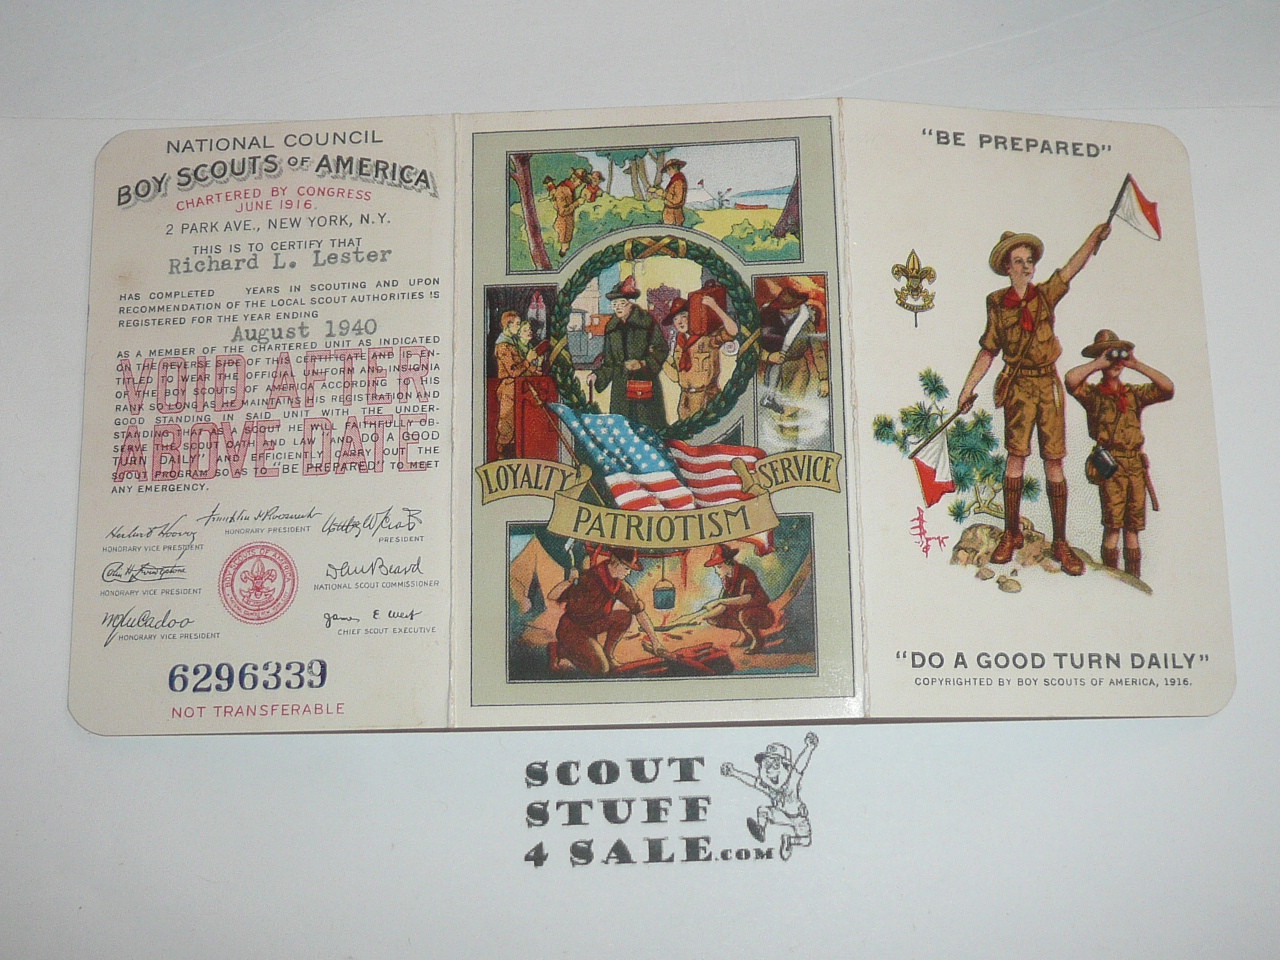 1940 Boy Scout Membership Card, 3-fold, with the Envelope, 7 signatures, expires August 1940, BSMC166